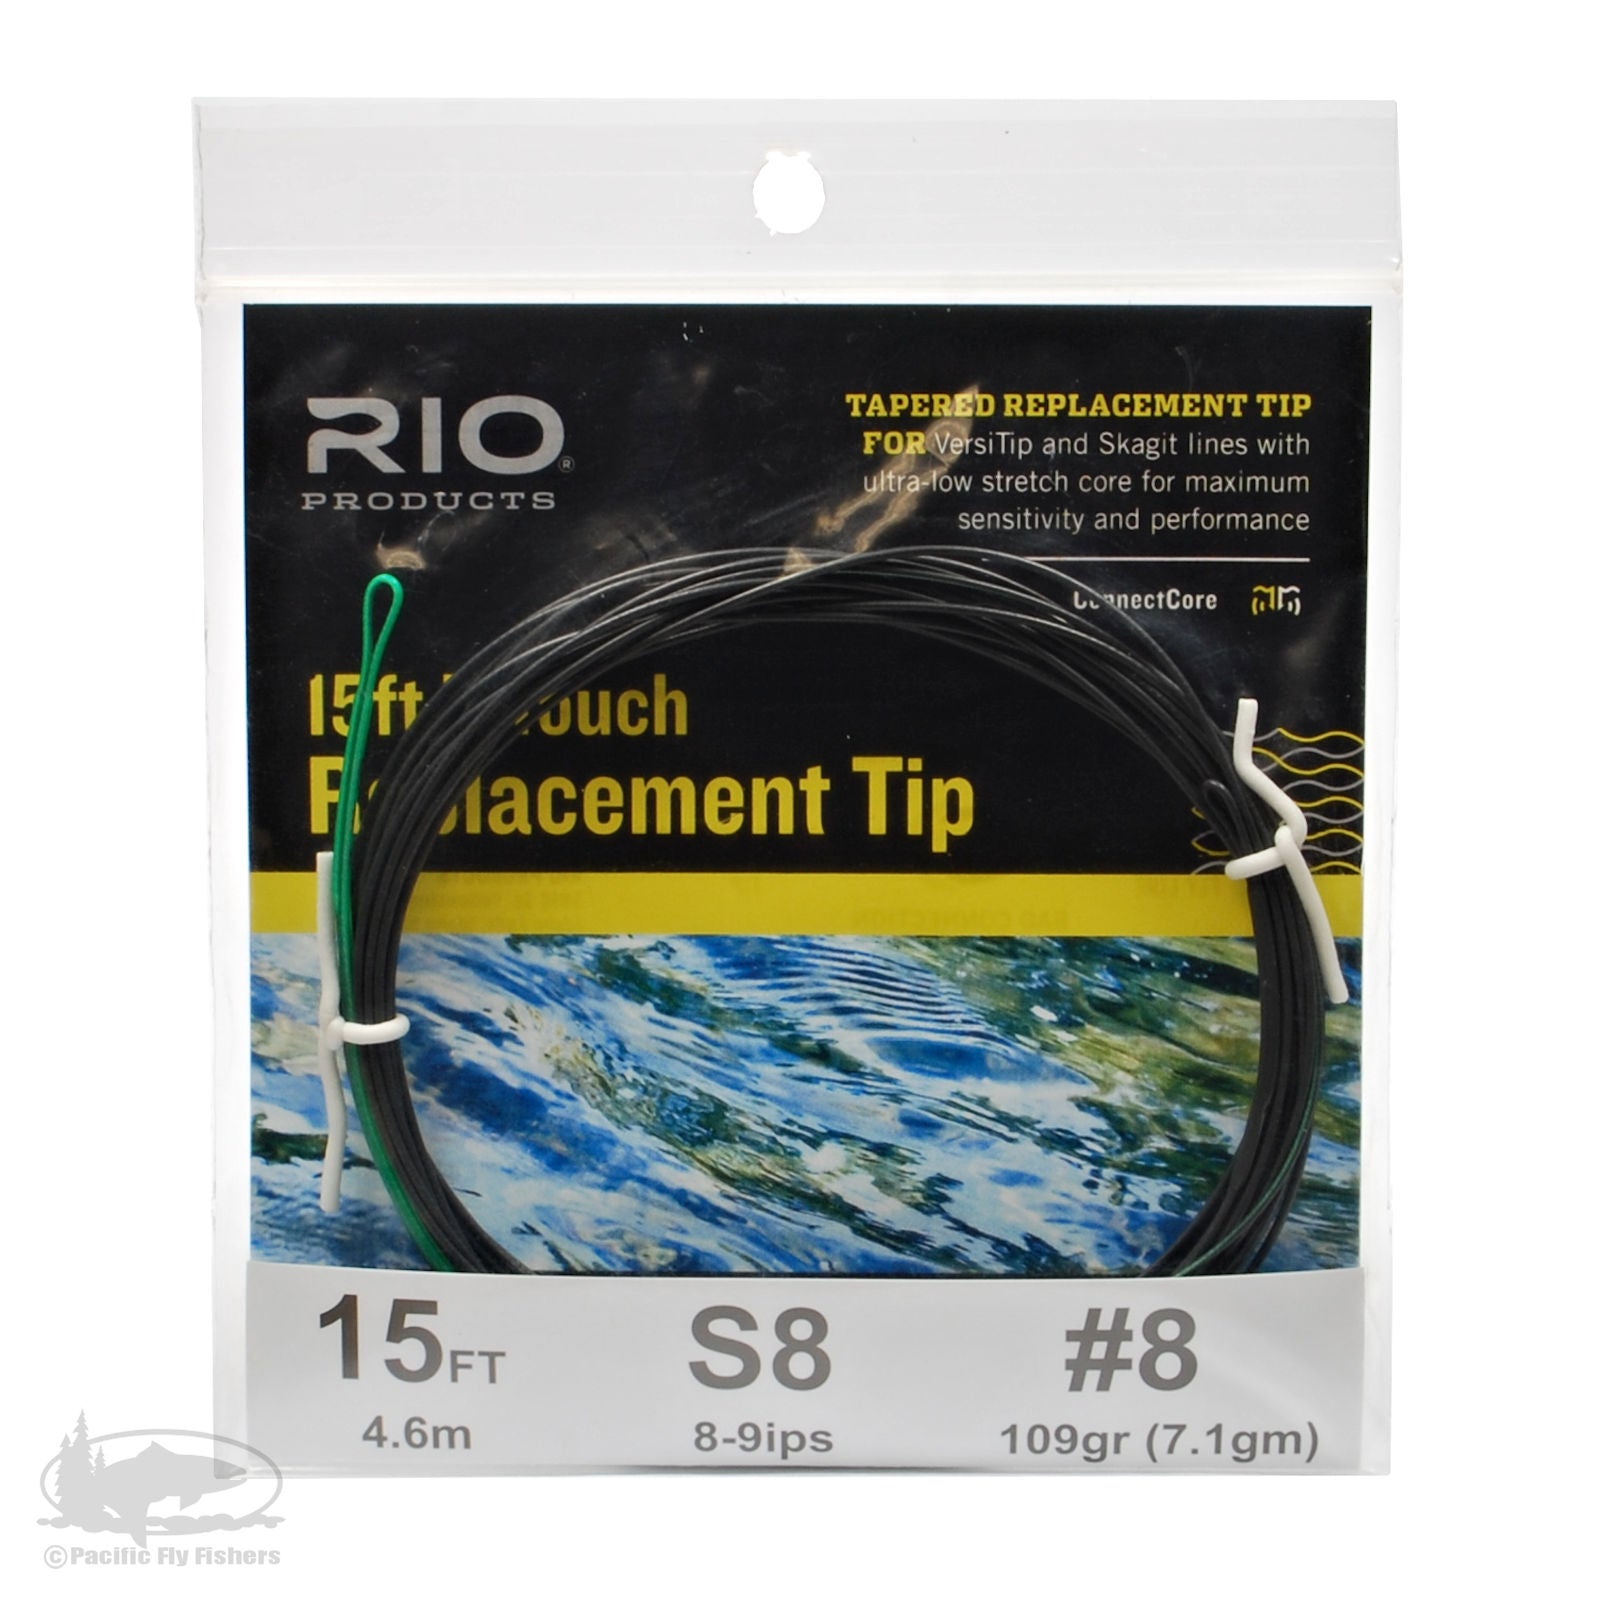 https://cdn.shopify.com/s/files/1/0211/7110/products/rio-15ft-intouch-replacement-tip-type-8_-_8wt.jpg